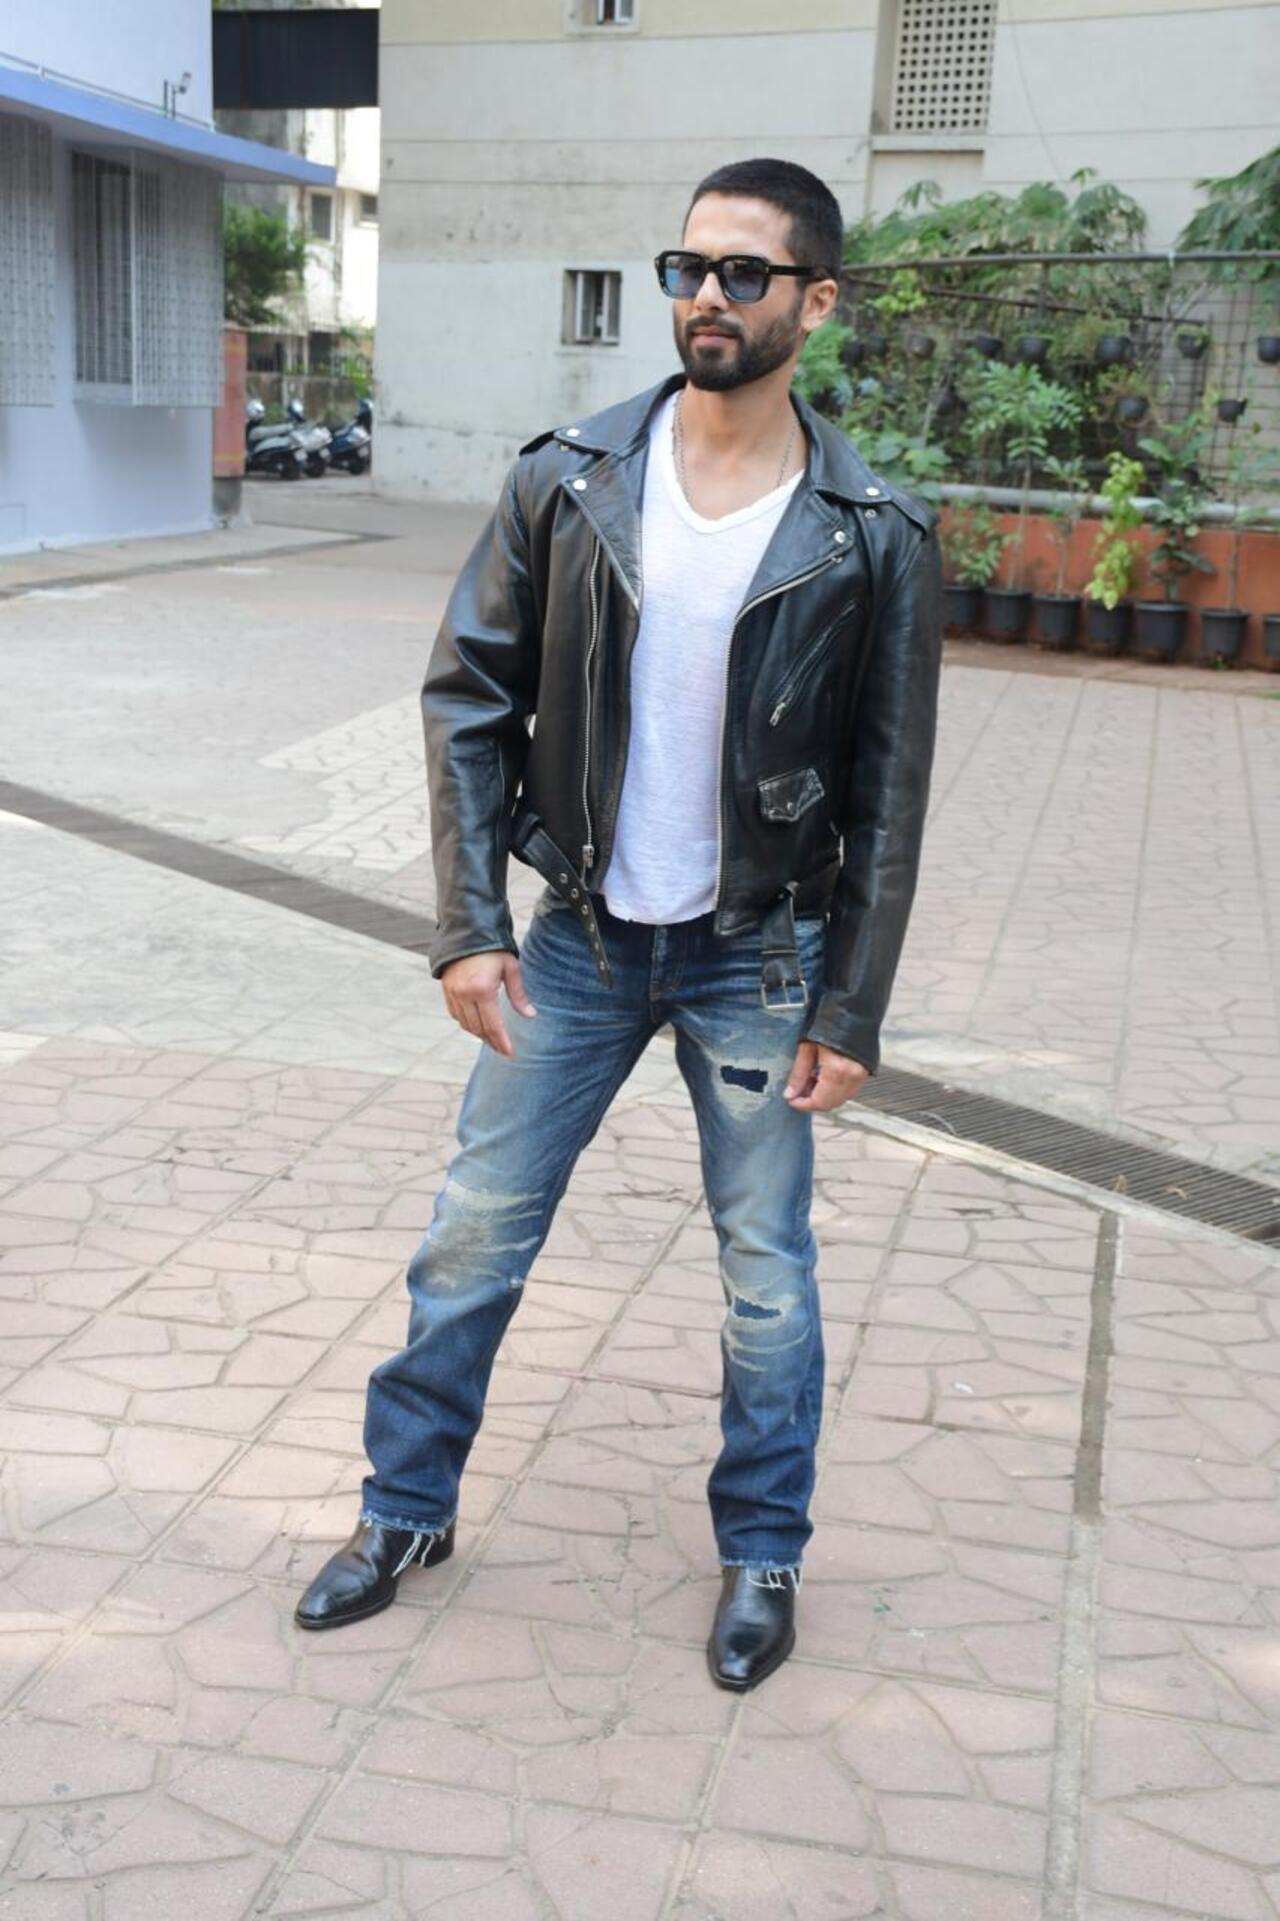 Shahid Kapoor sported a sexy black leather jacket as he promoted his upcoming film